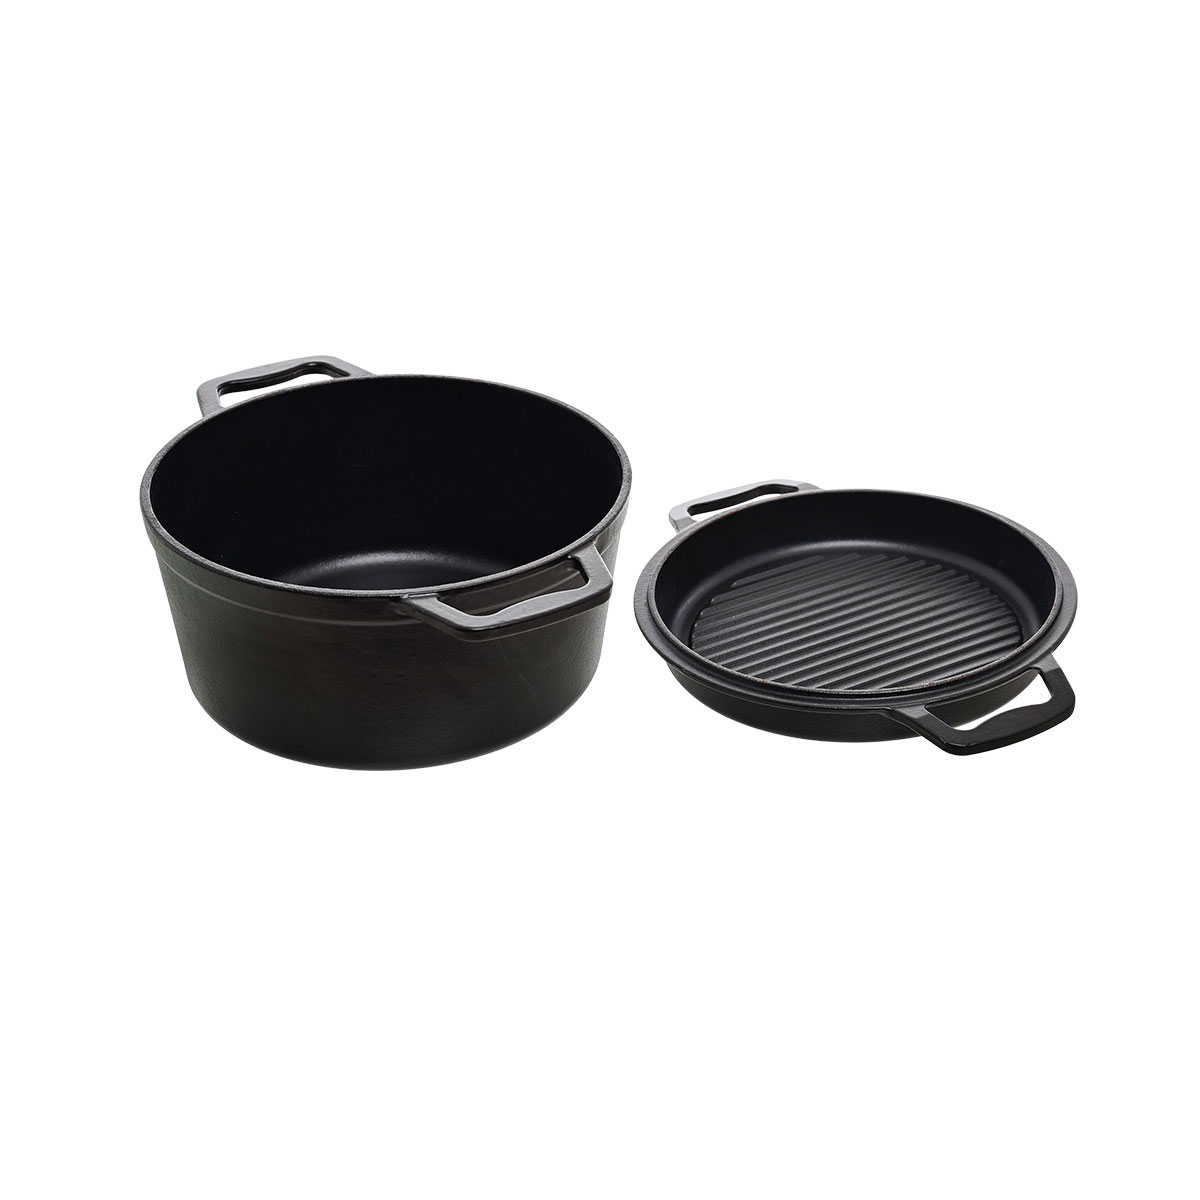 ESTIA CASSEROLE IRON 2 IN 1 CAST IRON 25CM WITH FRYING PAN LID